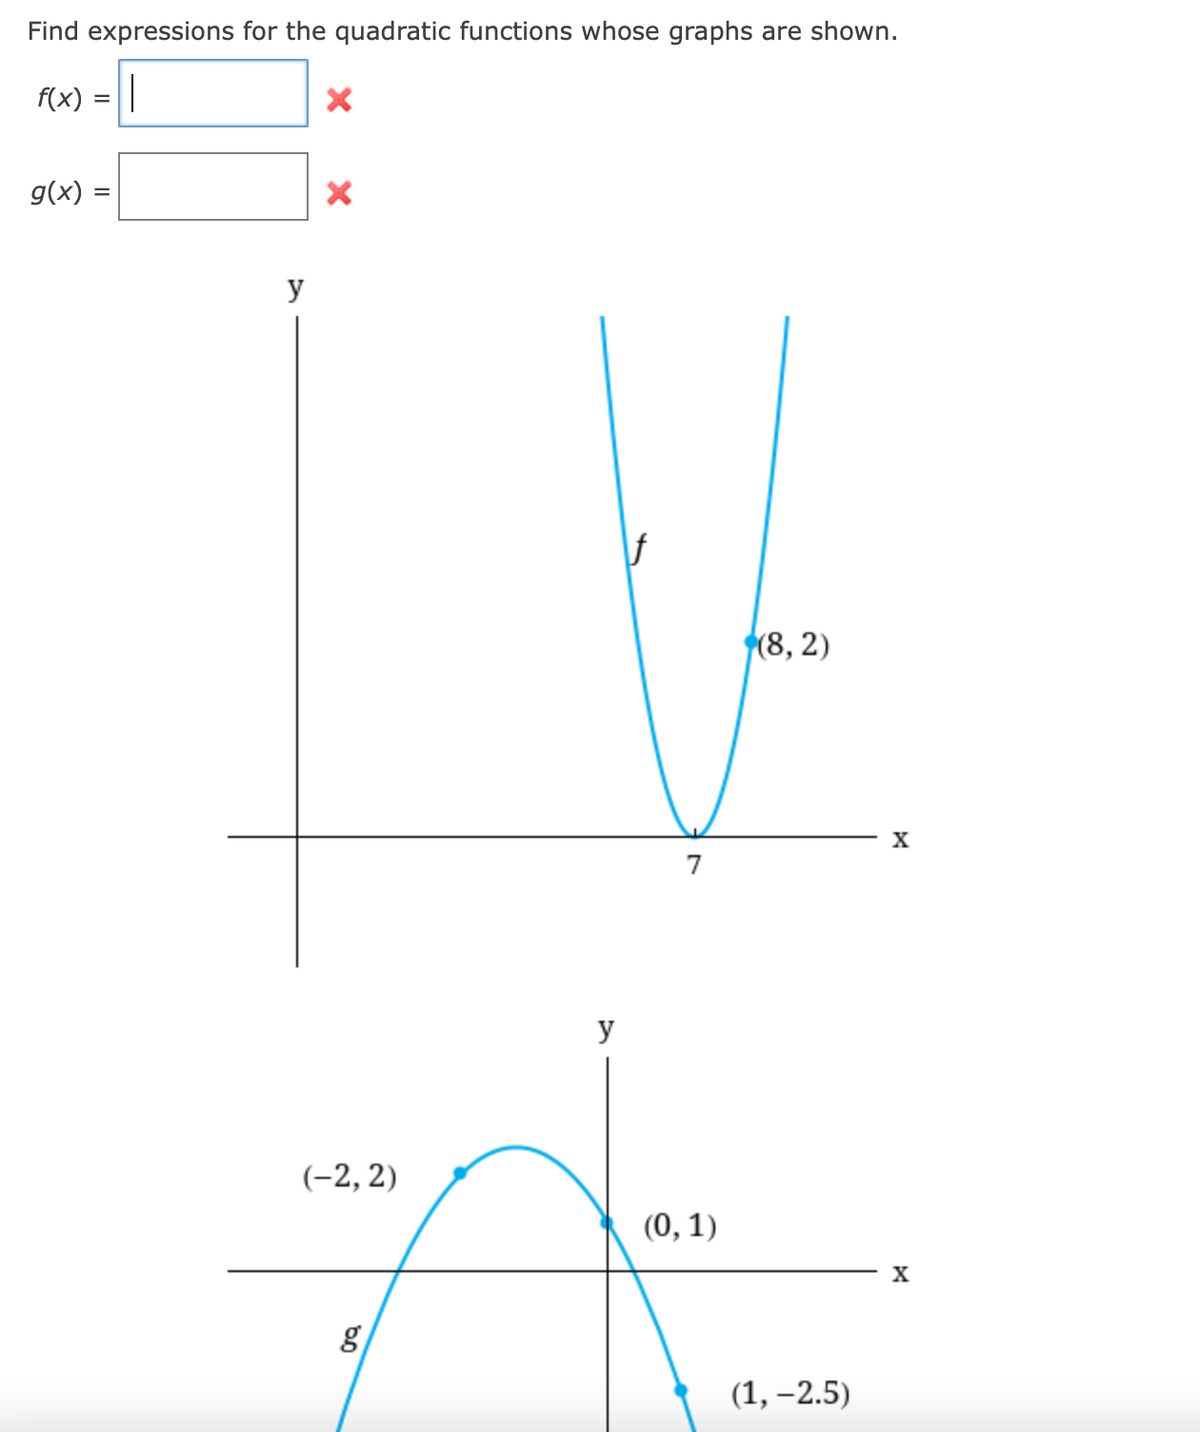 Find expressions for the quadratic functions whose graphs are shown.
f(x) = ||
g(x) =
y
X
X
(-2,2)
va
y
7
(0, 1)
(8, 2)
(1, -2.5)
X
X